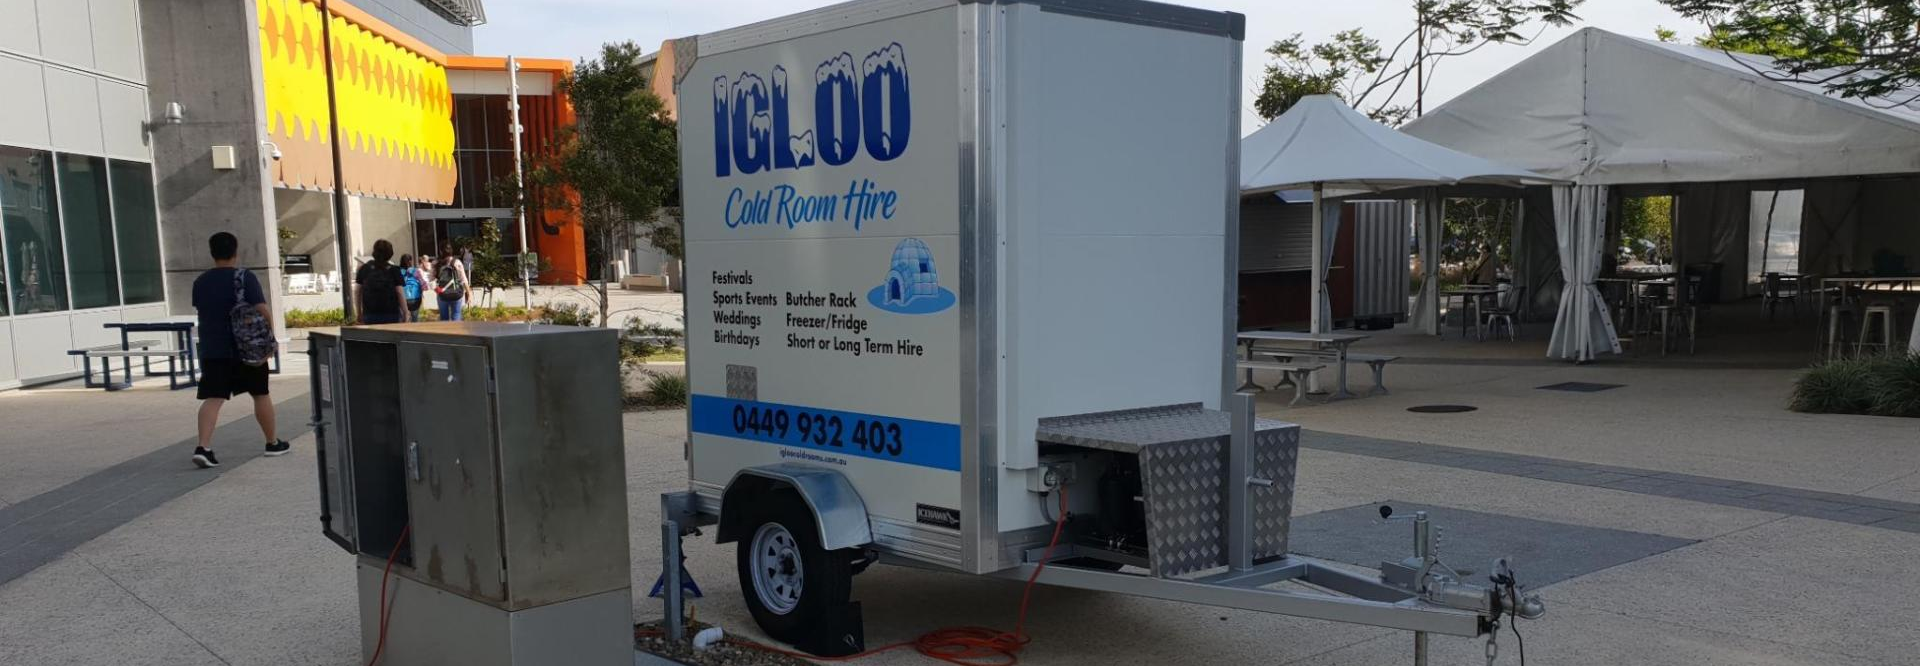 Igloo cold room trailers for hire goodna